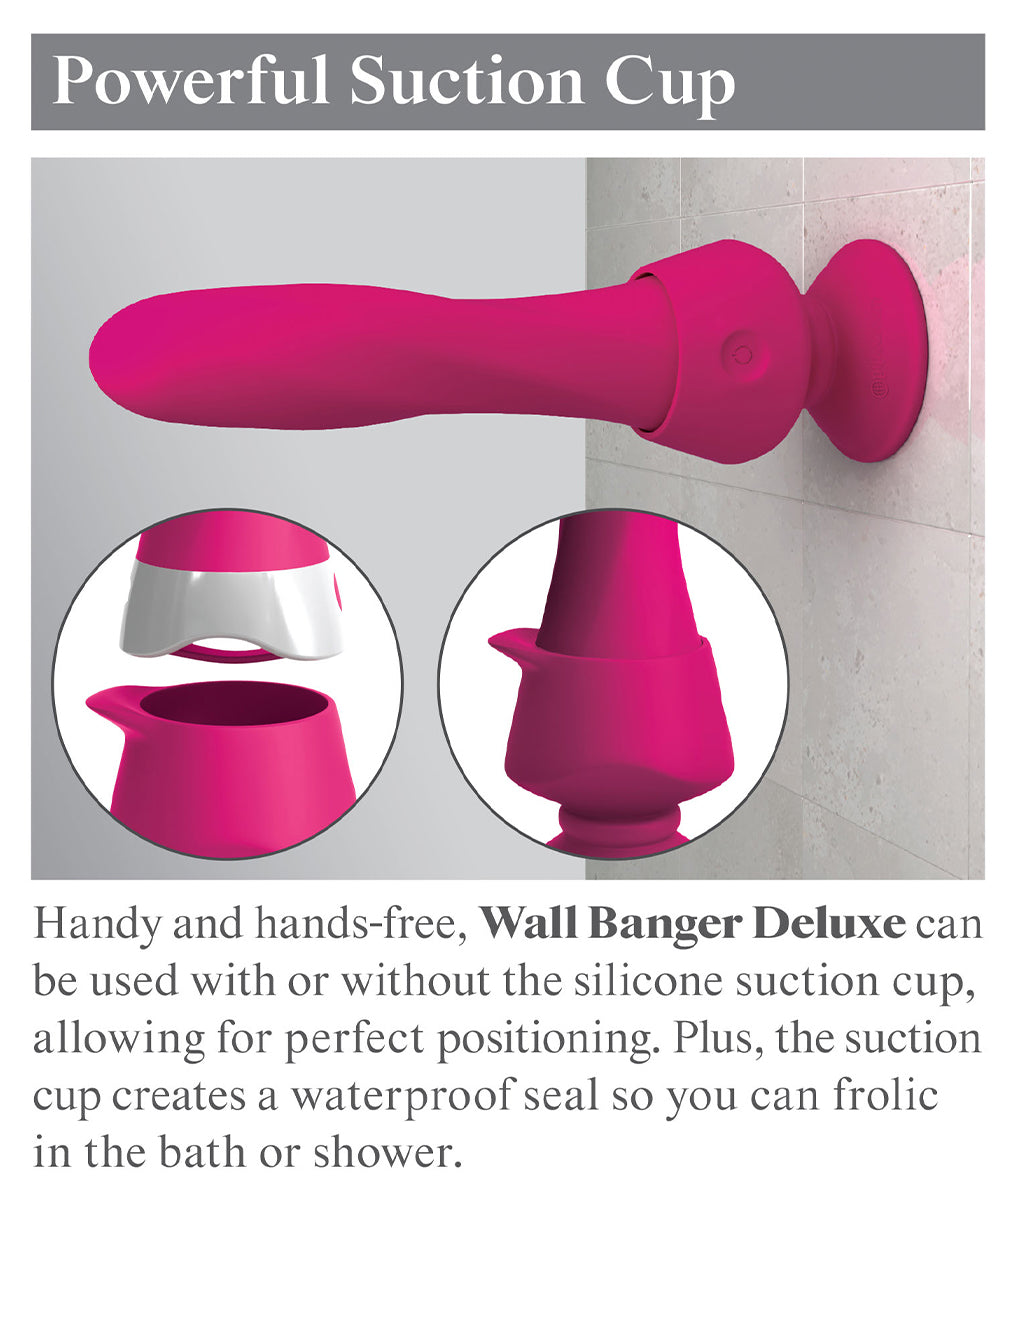 3Some Wall Banger Deluxe- Suction Cup Diagram